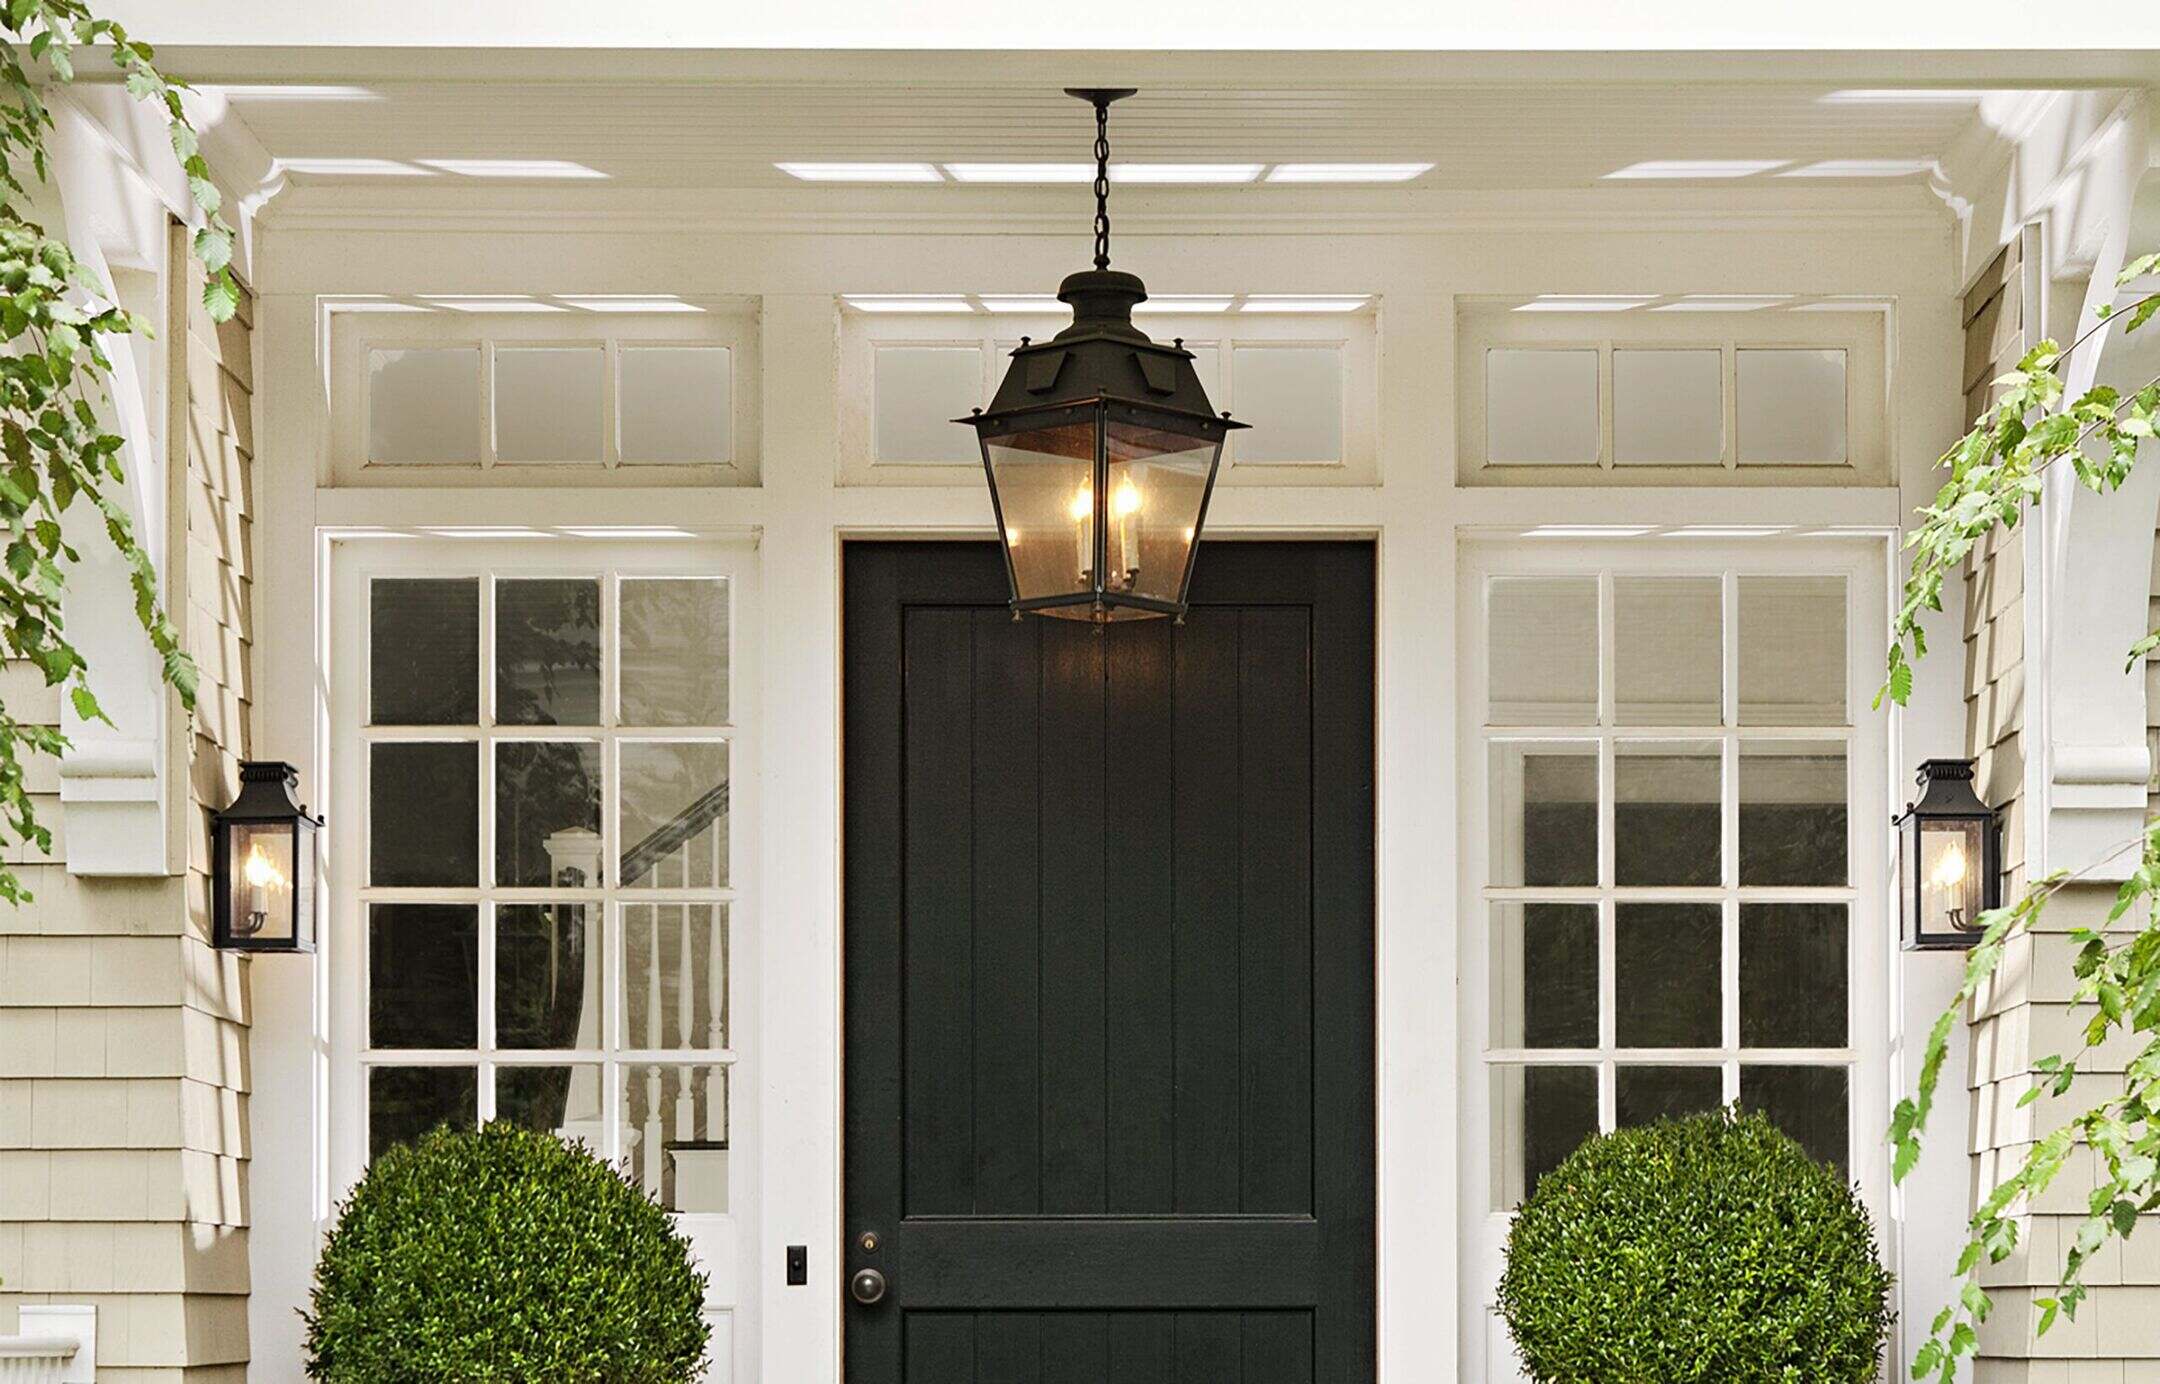 How To Determine Size Of Outdoor Light Fixture